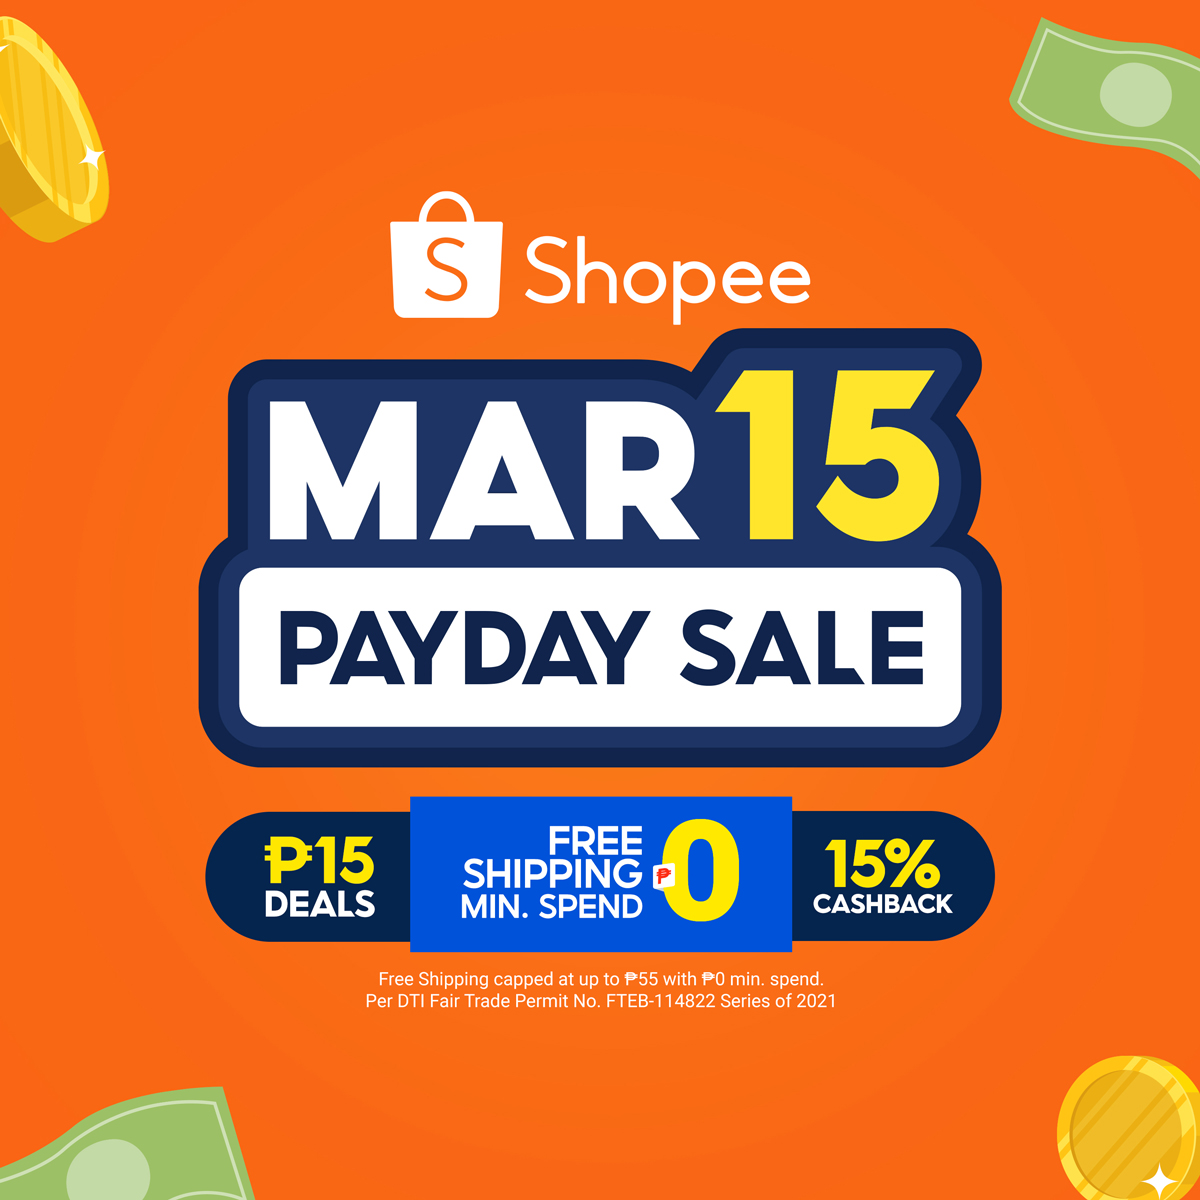 Check out the best deals on Shopee March 15 Payday Sale!